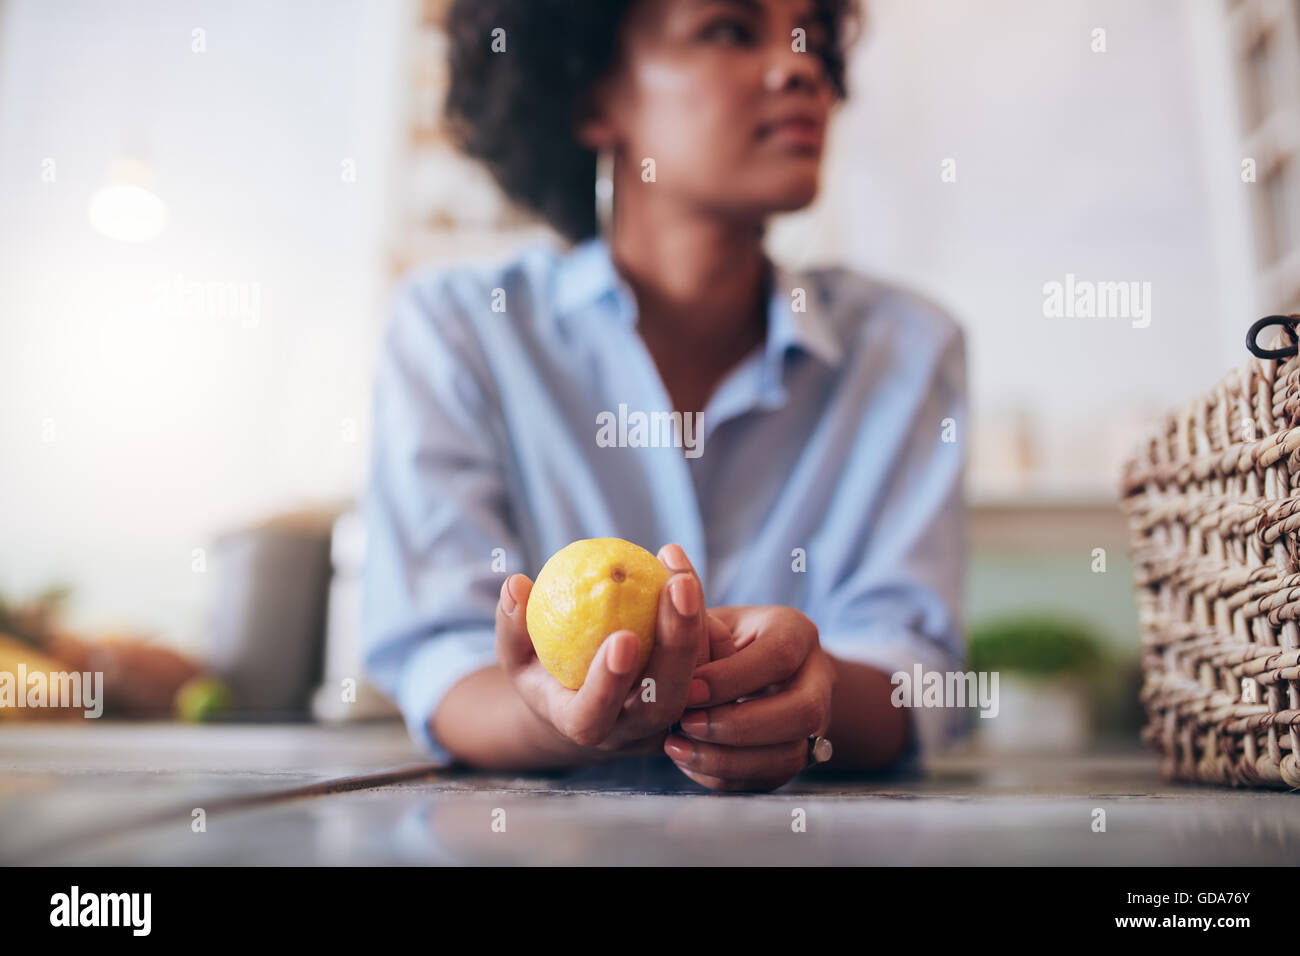 Close up shot of young woman standing at a juice bar counter holding lemon in her hand. Stock Photo